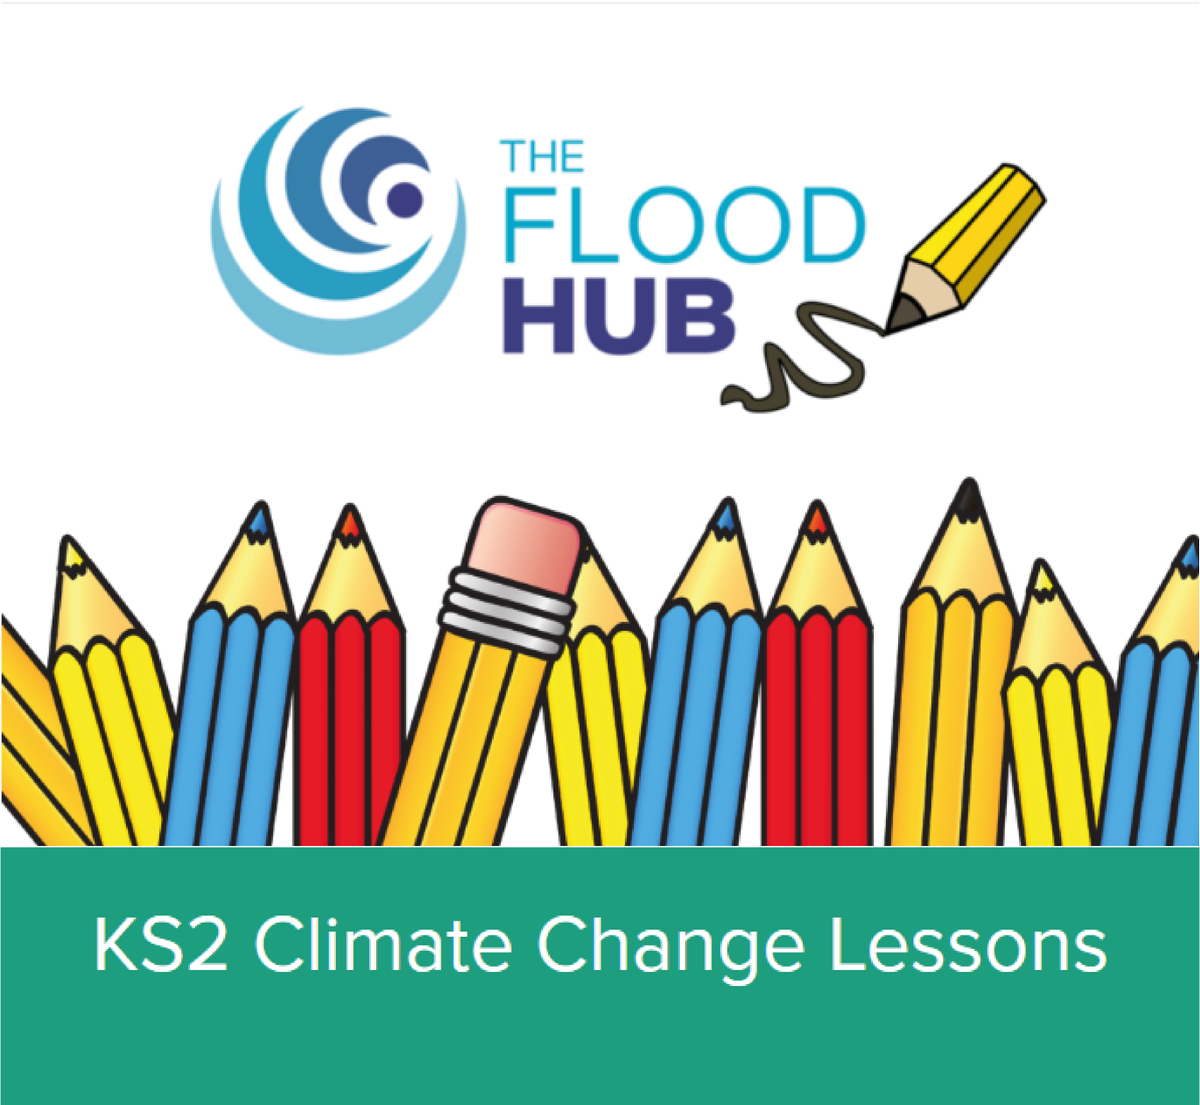 Have you seen our #KS2 education package?📚 ow.ly/3LlR50RtoXN We have a #ClimateChange and #Flooding package which consists of: 📚PowerPoint lessons 📚Lesson plan & #teachers notes 📚Worksheets or instructions for in-class exercises & homework #Geography #UKEdChat